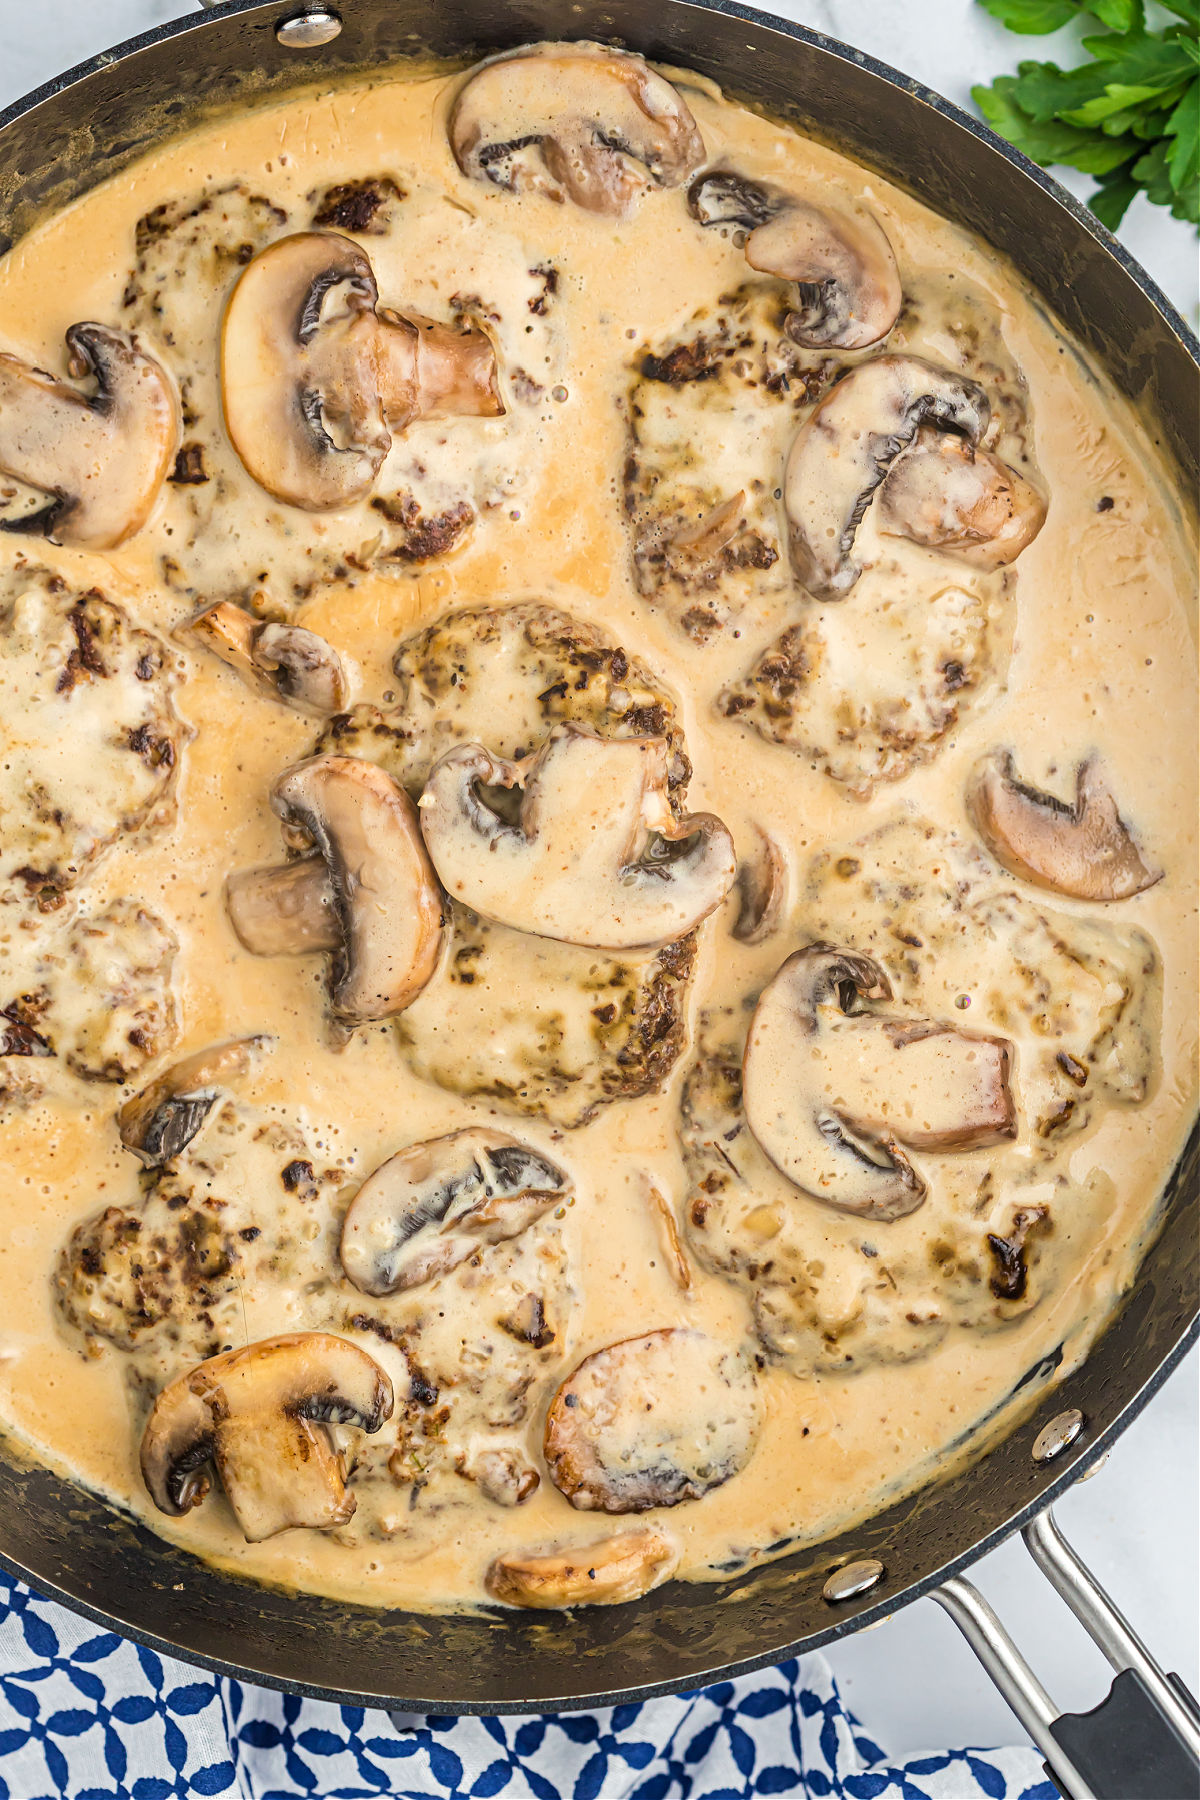 Salisbury steak with mushrooms and gravy in a skillet.